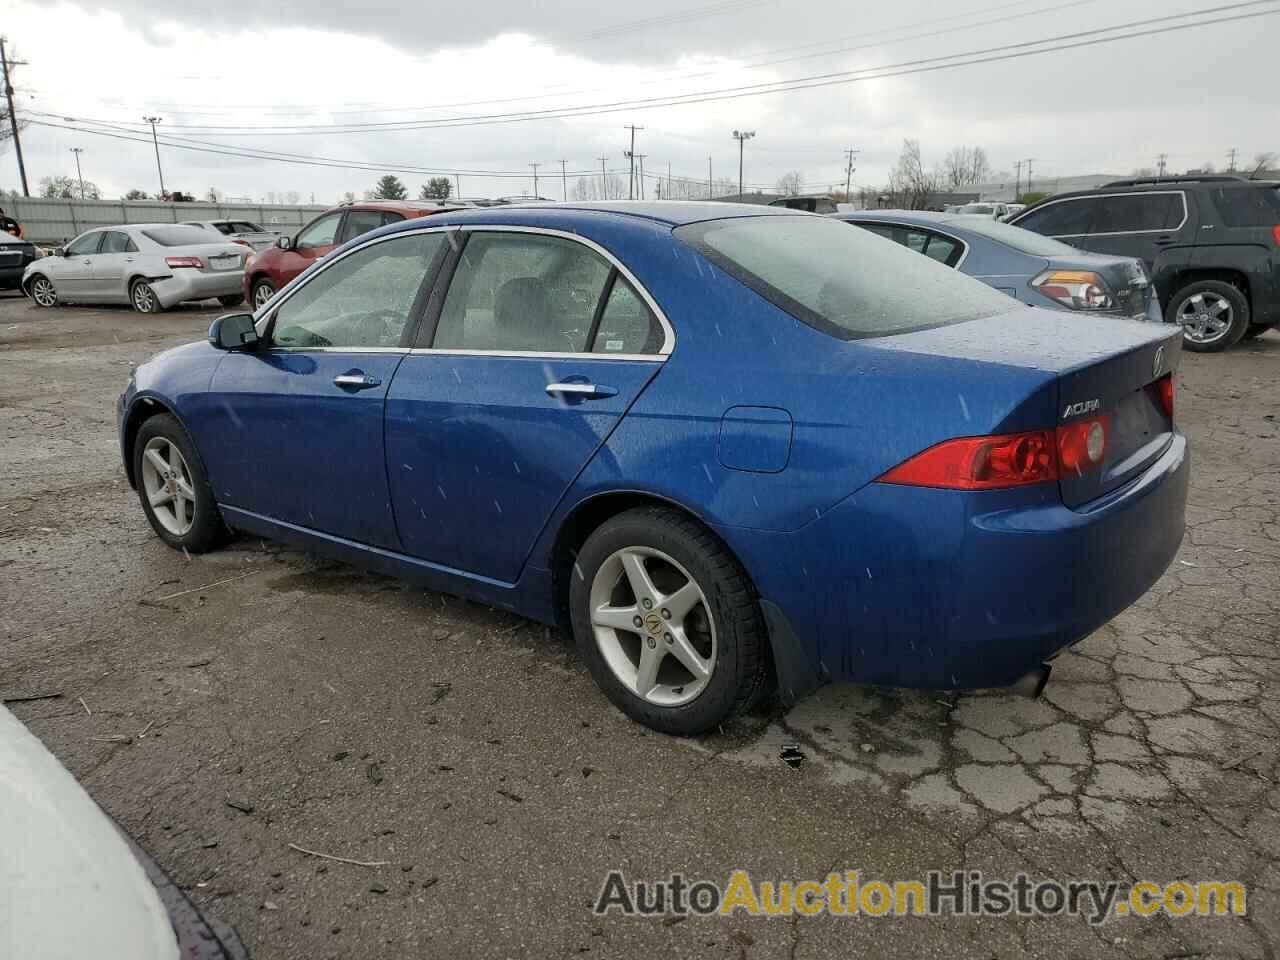 ACURA TSX, JH4CL95944C040309